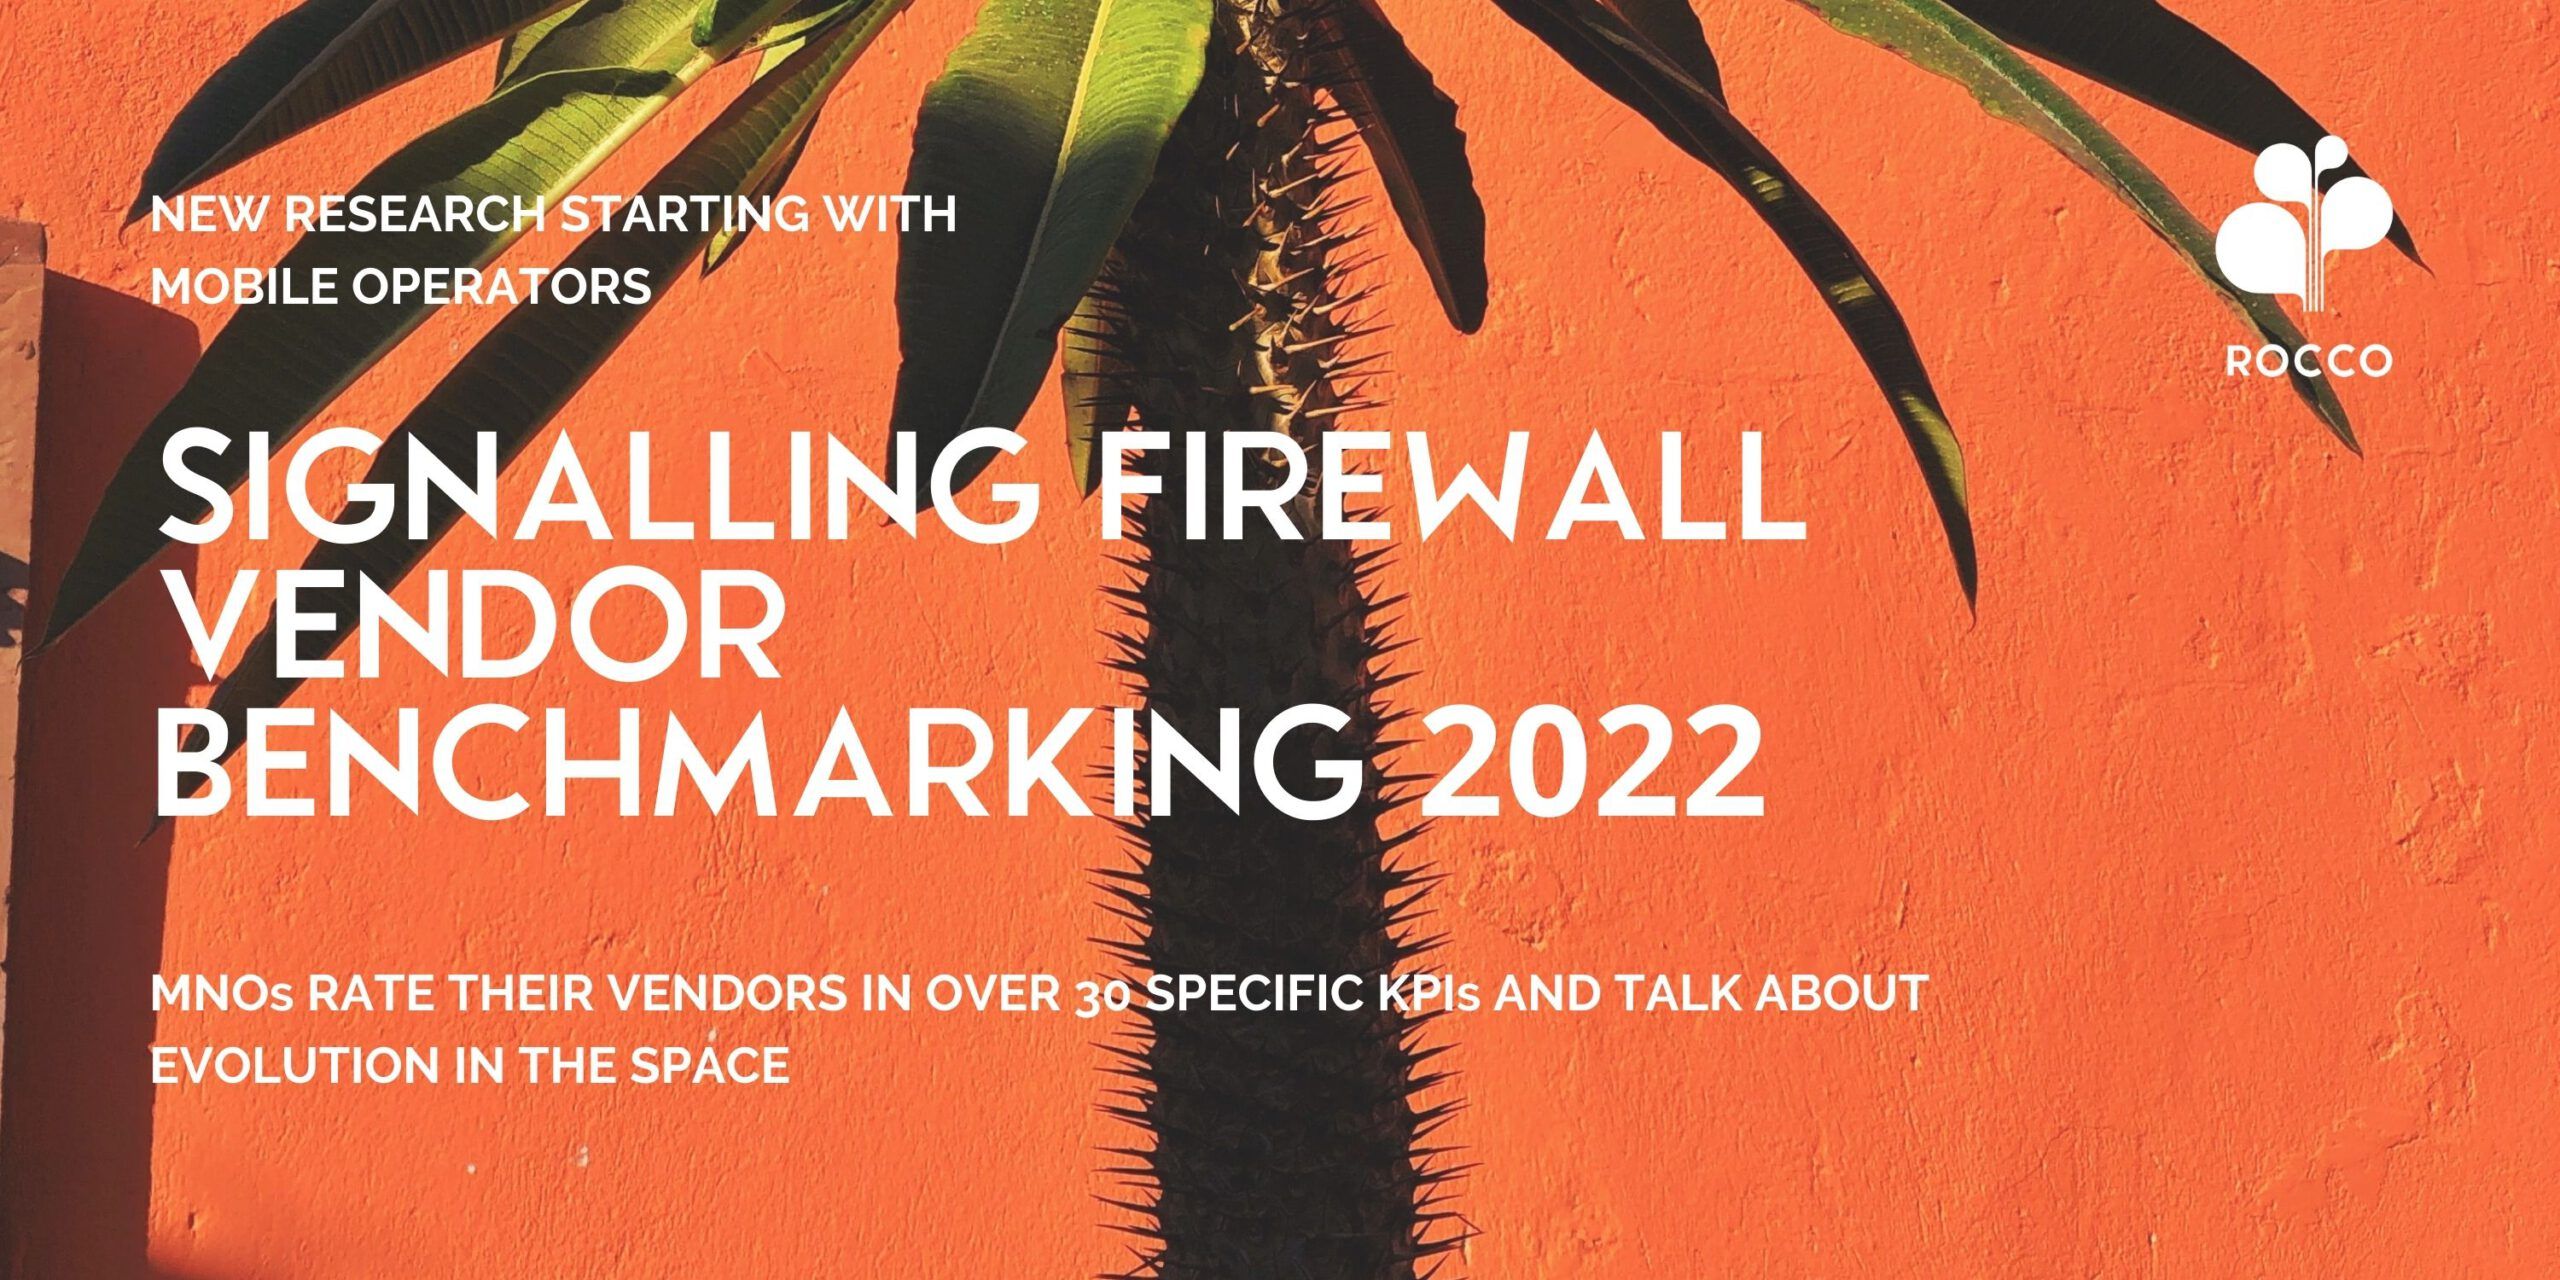 New Research on Signalling Firewalls Vendors for 2022